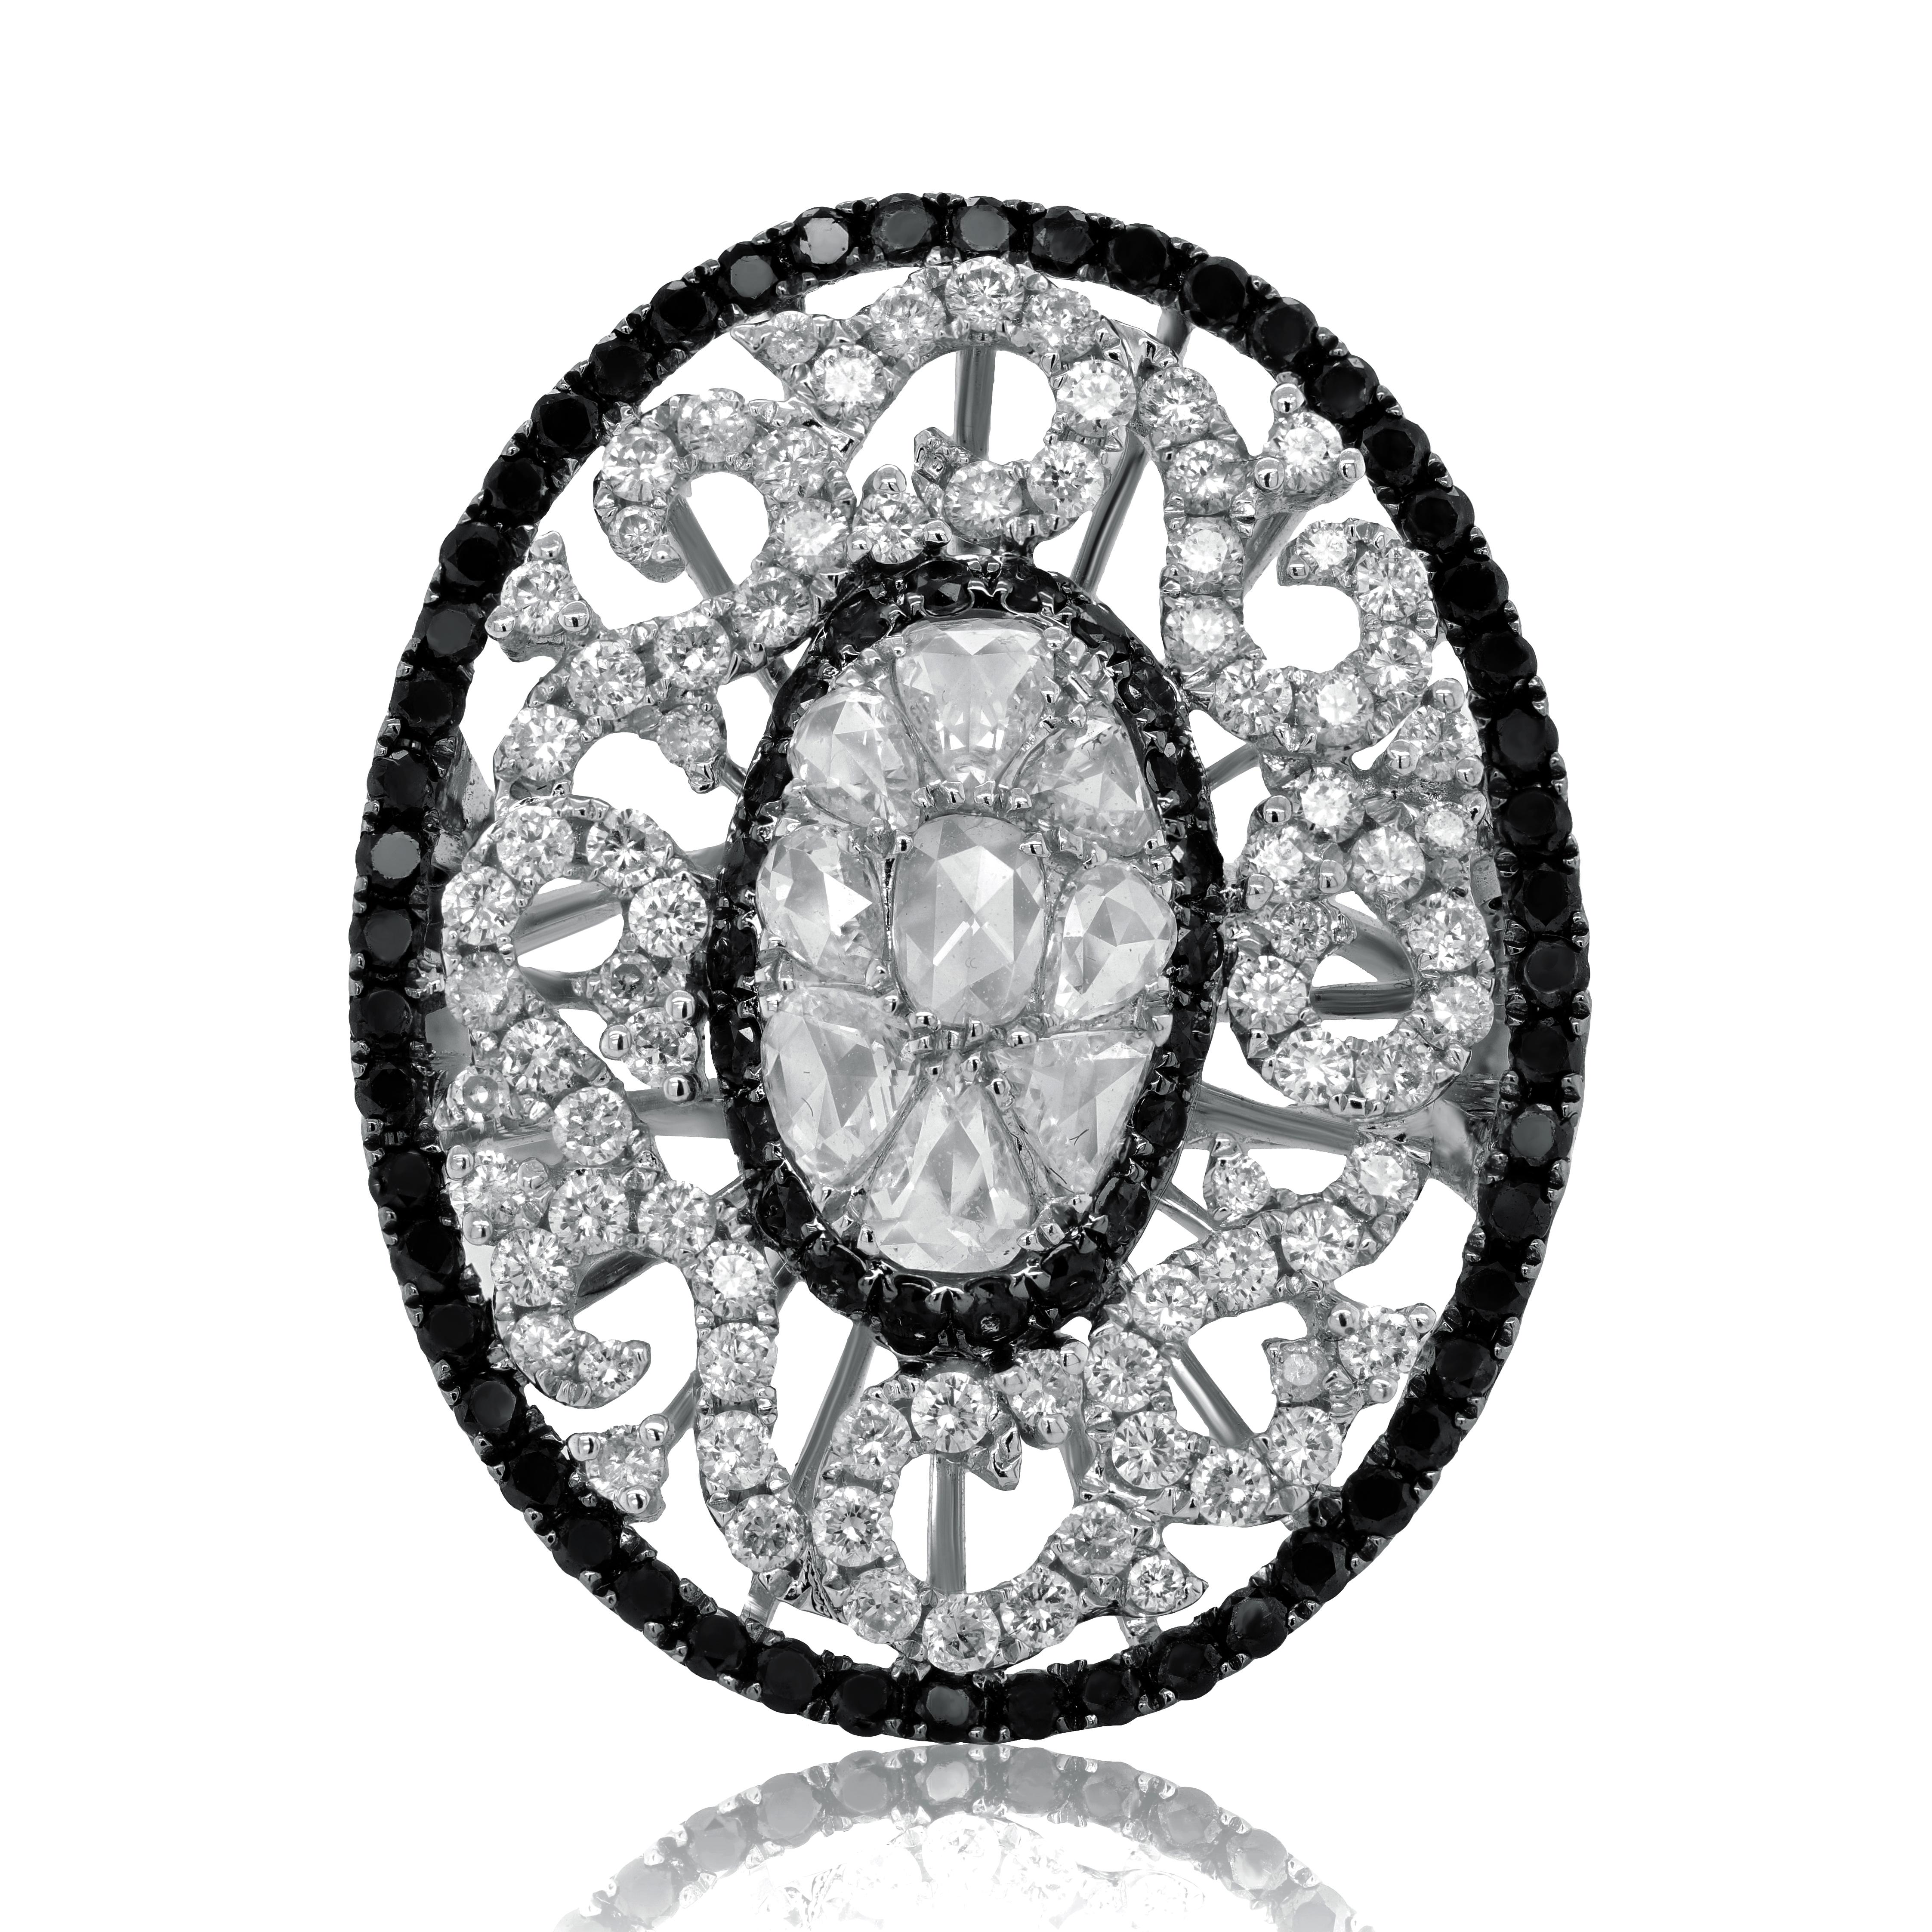 18 kt white gold diamond fashion ring with a center piece surrounded by spirals adorned with 2.65 cts tw of diamonds.
Diana M. is a leading supplier of top-quality fine jewelry for over 35 years.
Diana M is one-stop shop for all your jewelry